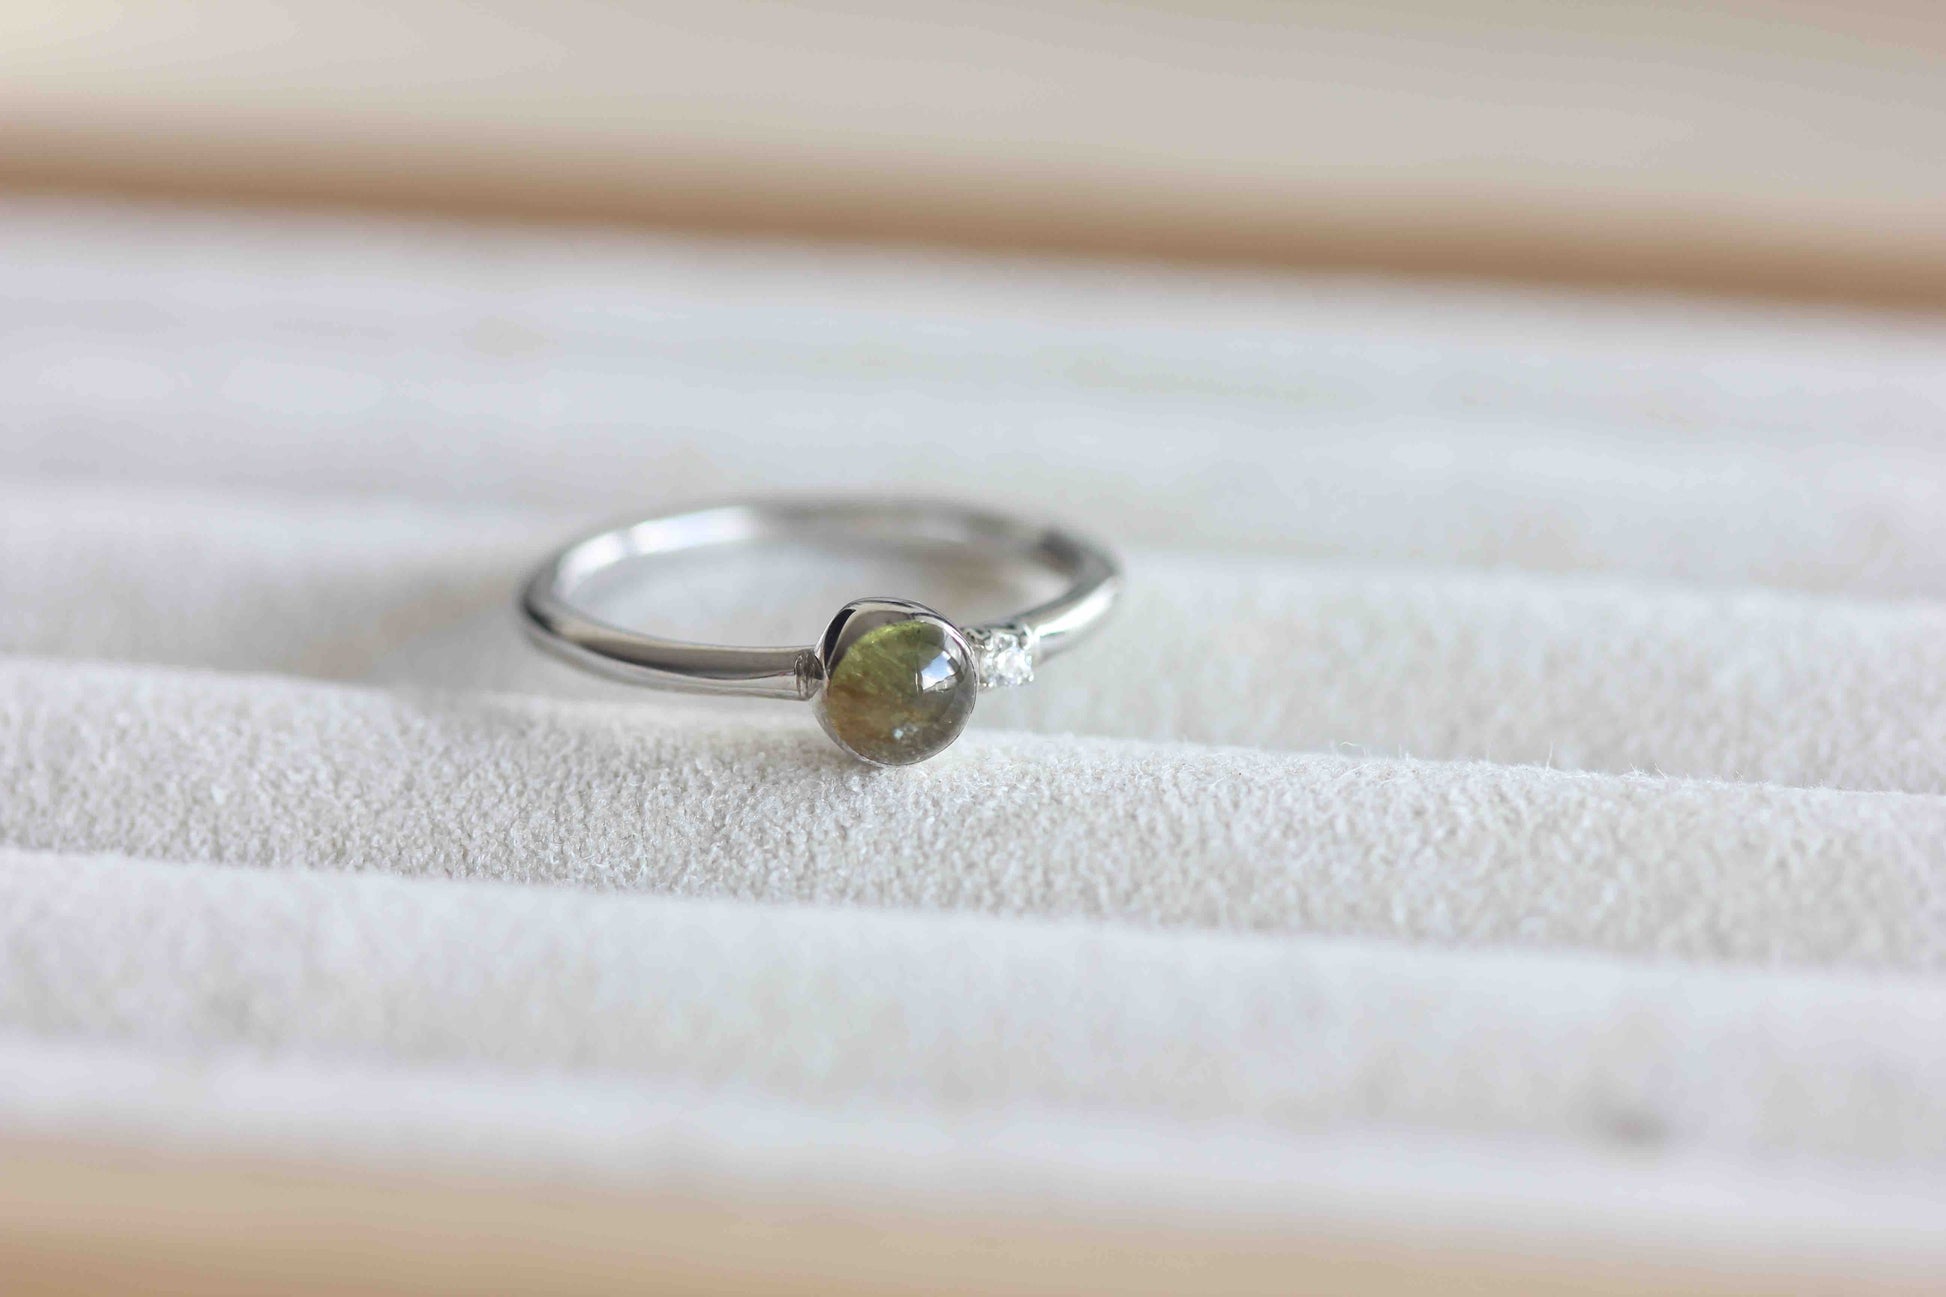 Tourmaline Silver Ring. Sterling Silver Jewelry. Tourmaline Jewelry. Watermelon Tourmaline.